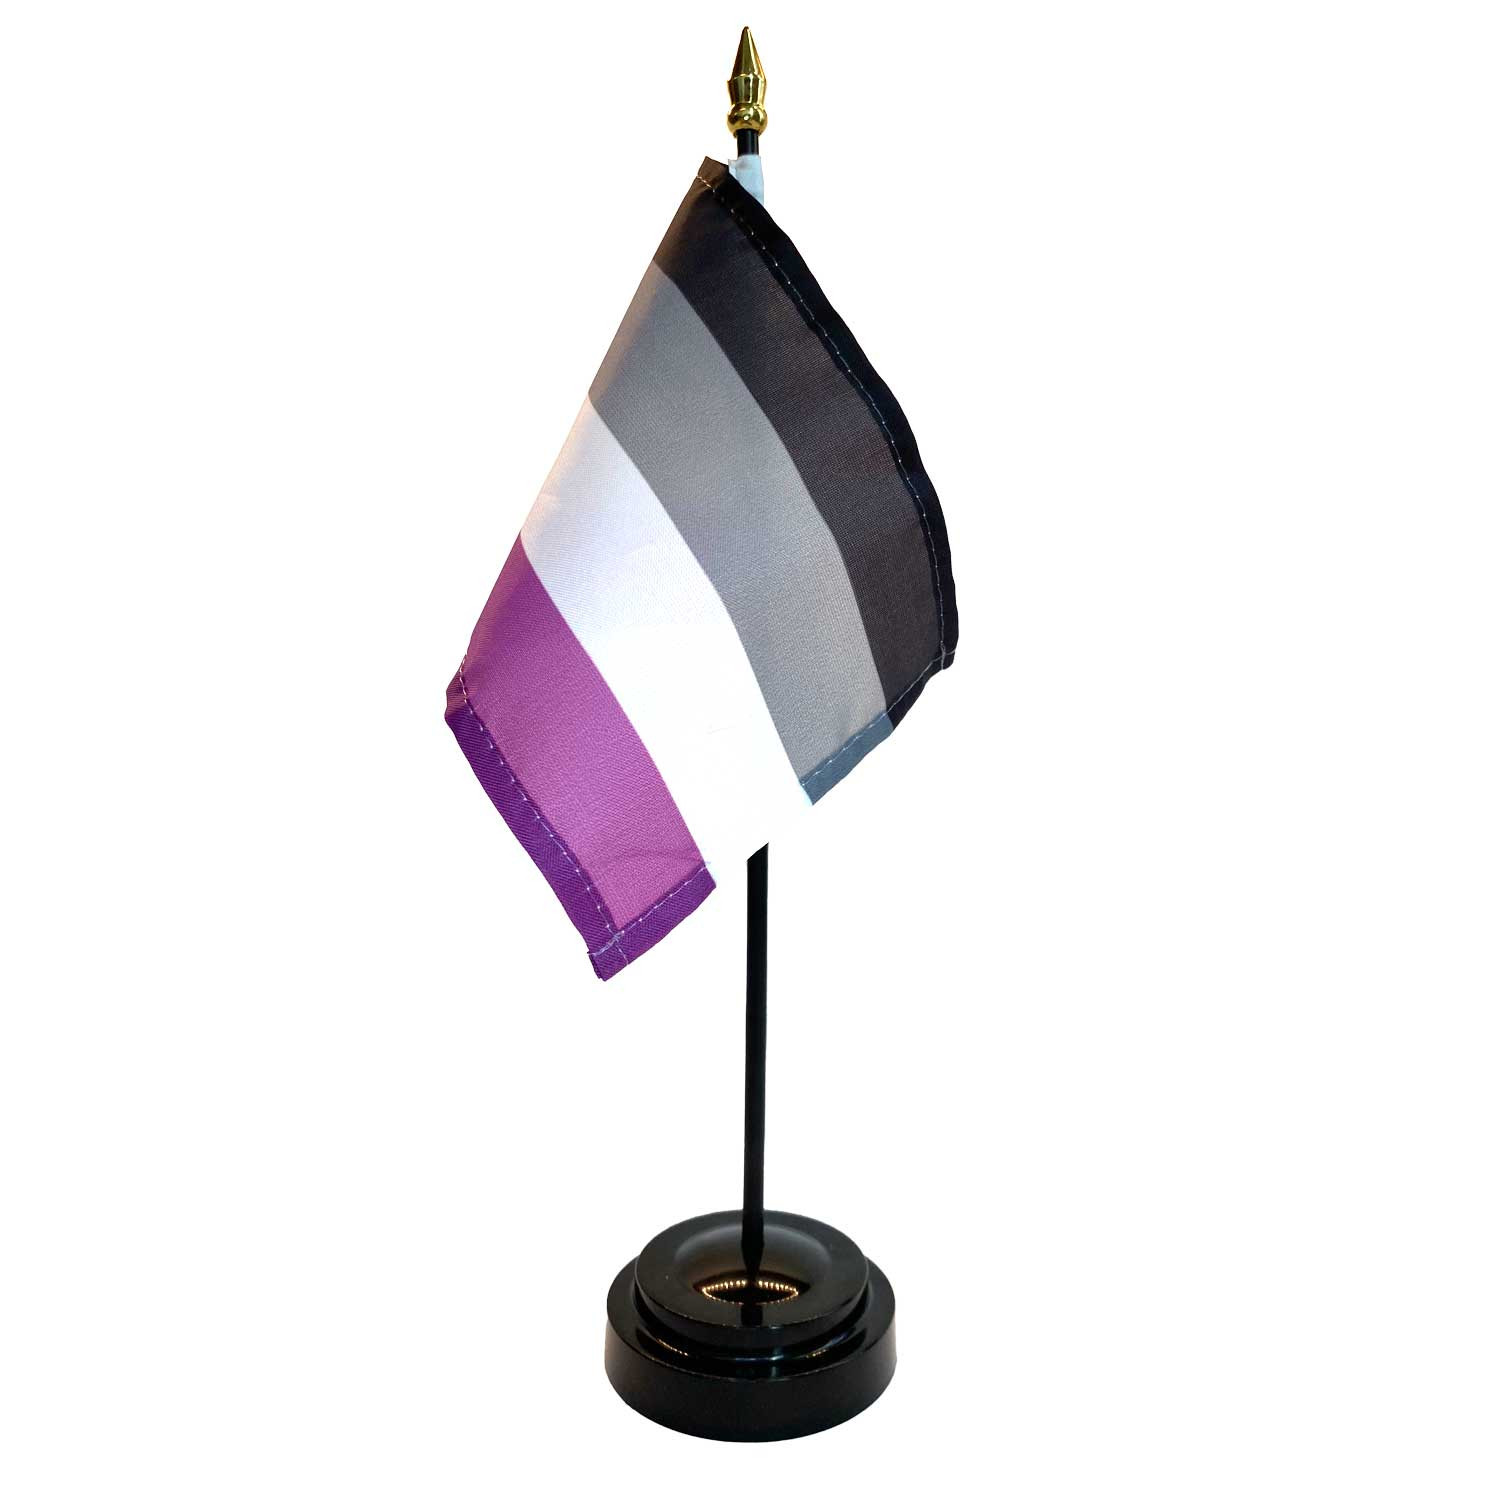 Flying Asexual Pride Flags